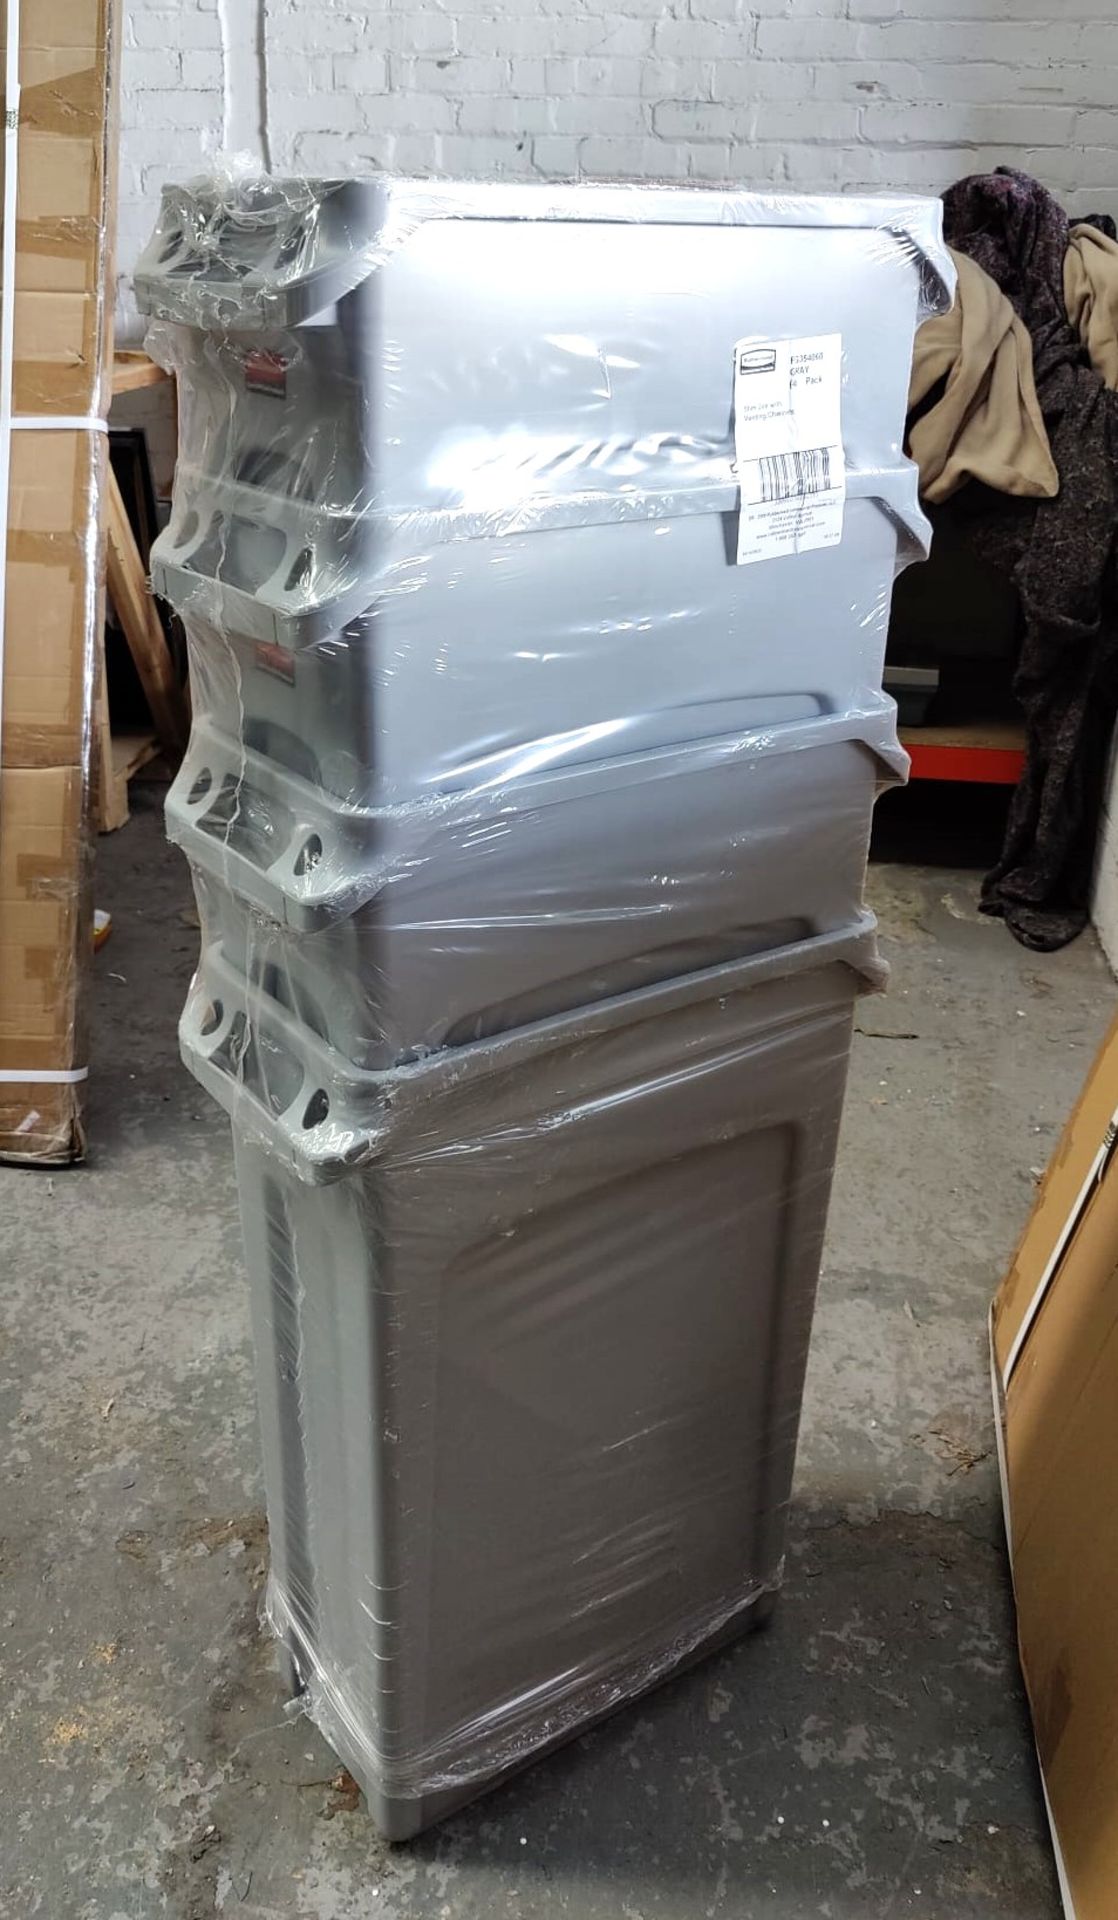 1 x Rubbermaid Slim Jim Waste Bin With Venting Channels Colour: Grey - Type: FG354060 - Brand New - Image 3 of 5